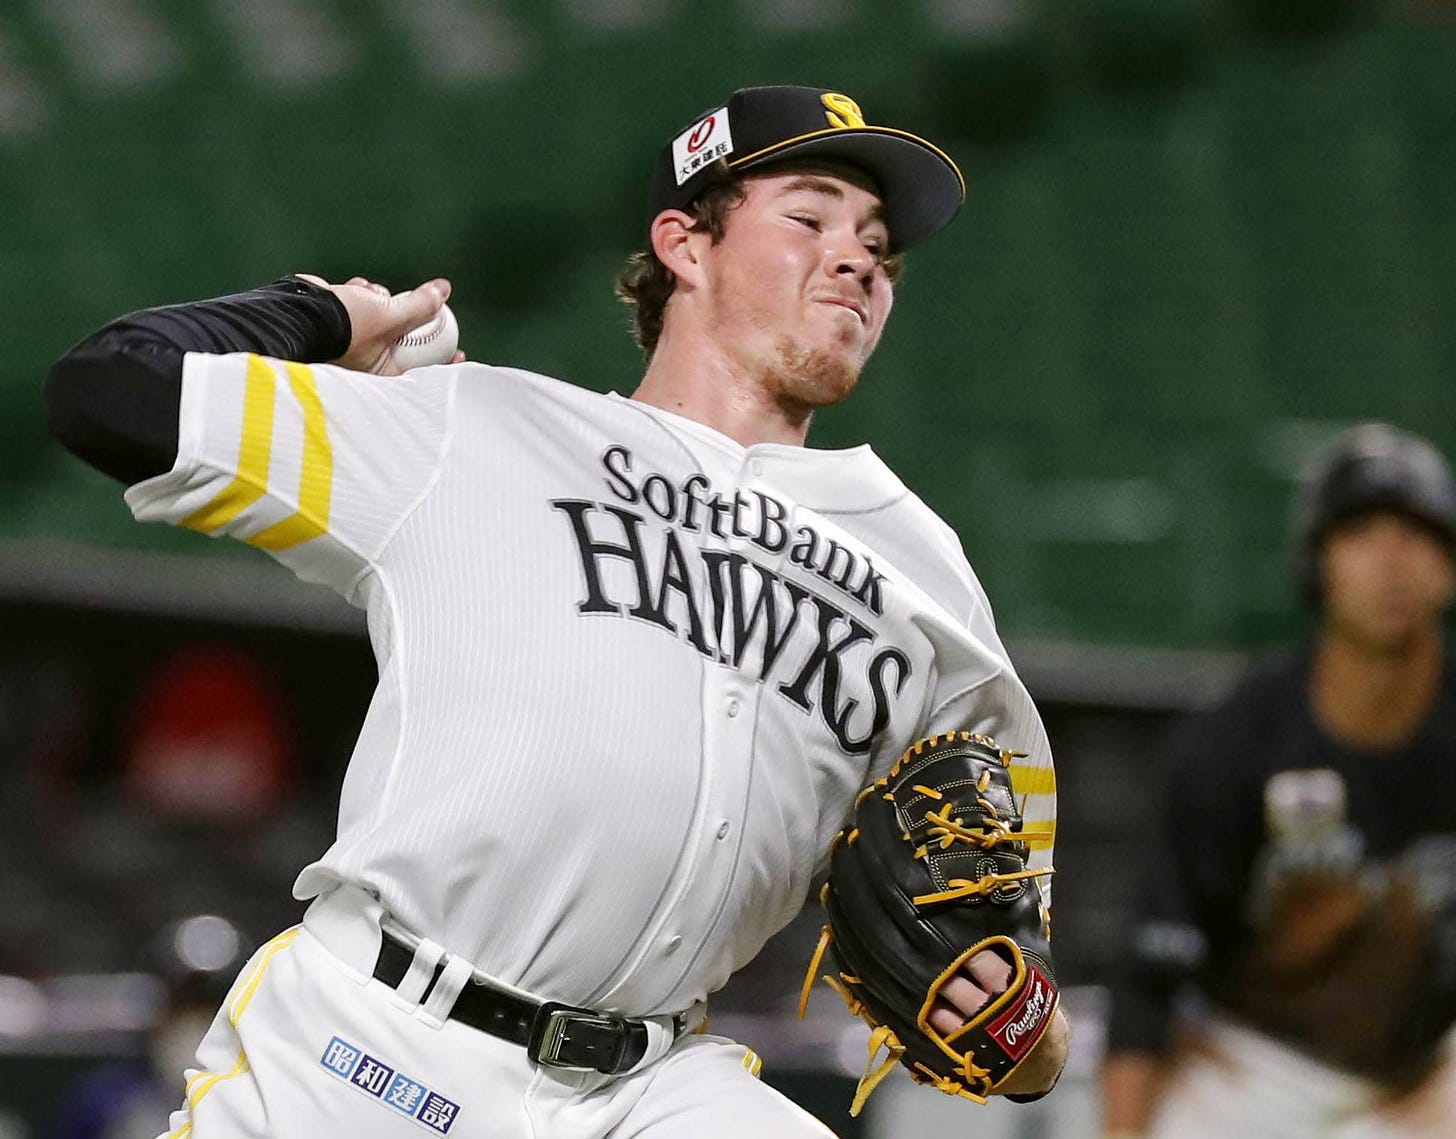 Hawks pitcher Carter Stewart pitches during a preseason game on March 20 in Fukuoka. | KYODO